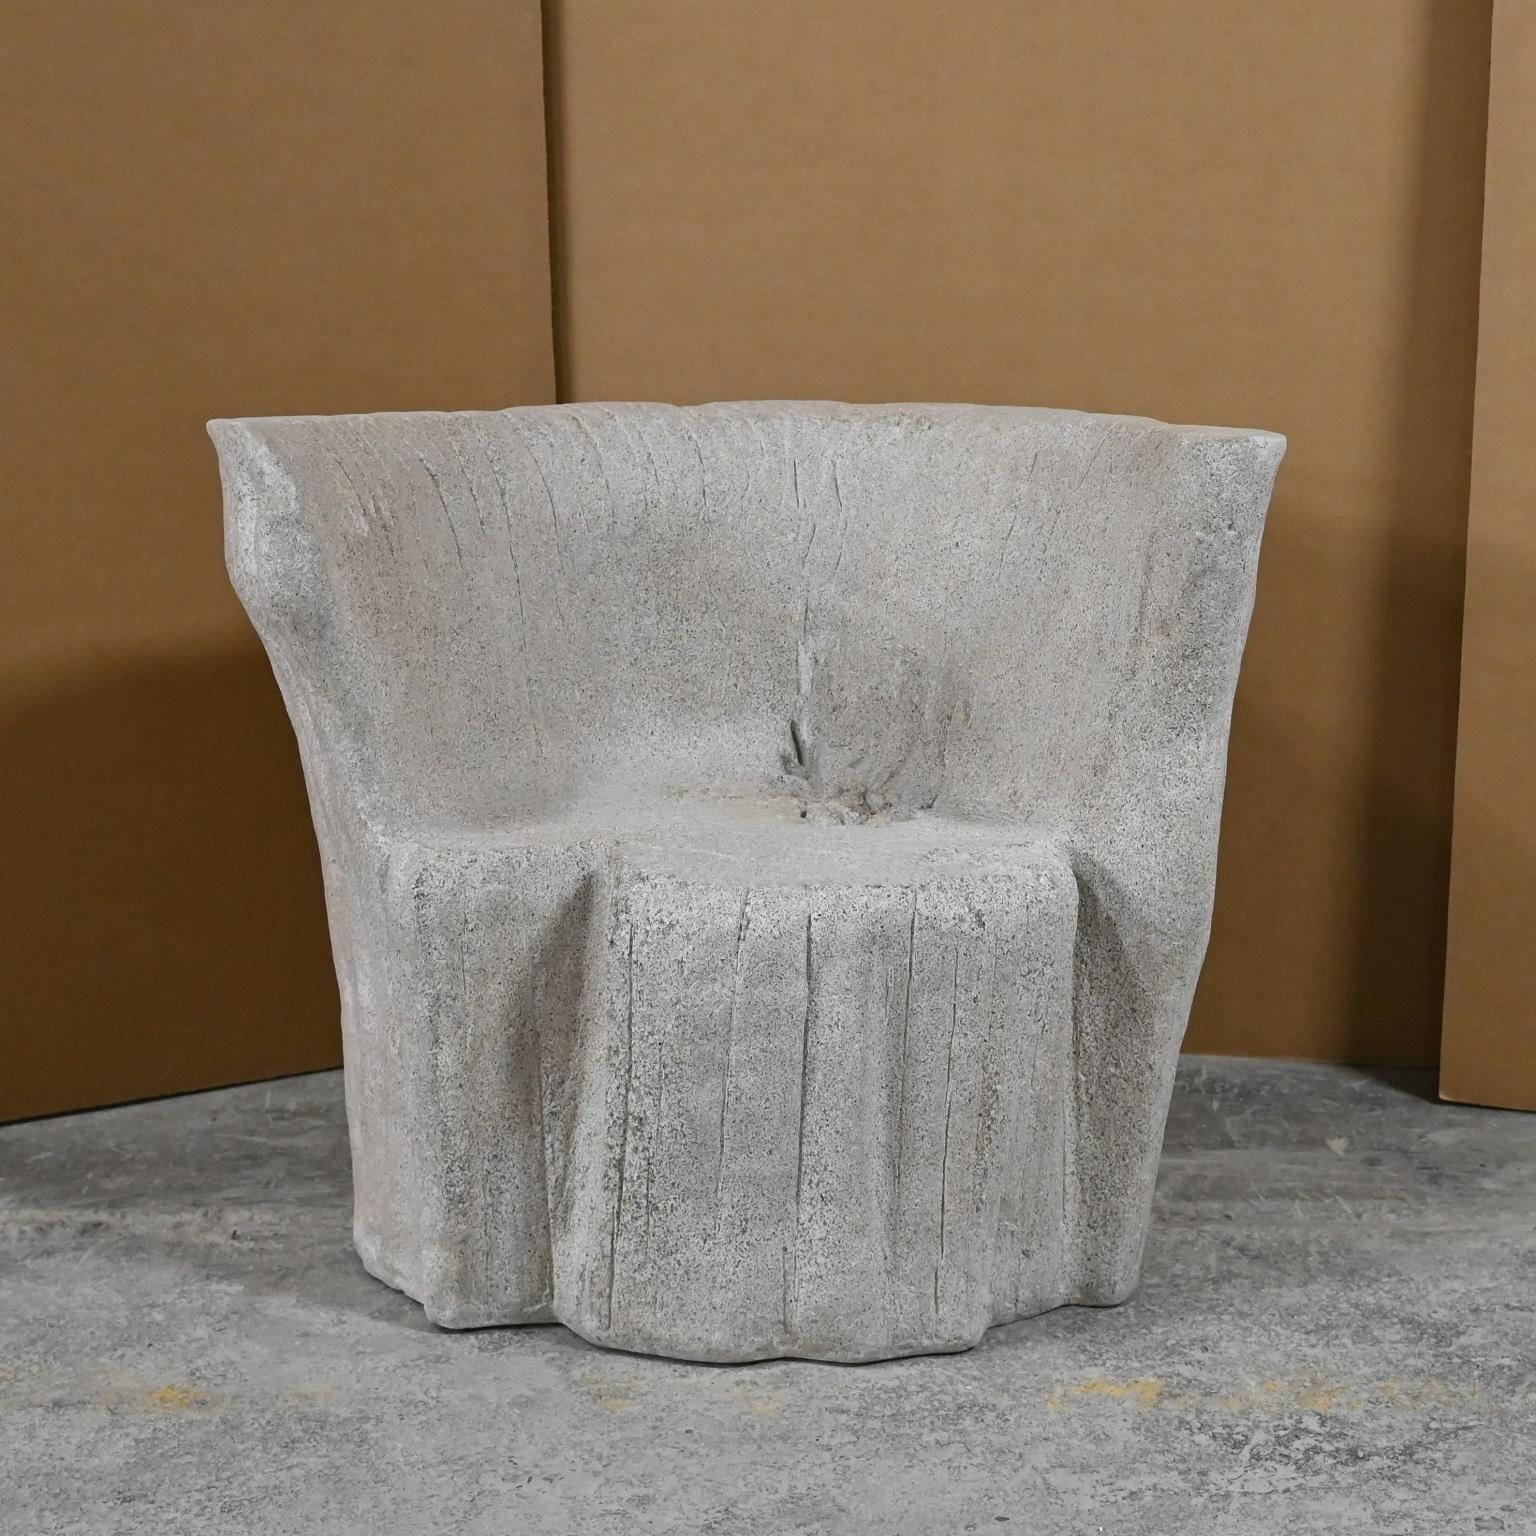 The mold for this Acacia chair was created from an actual tree stump. Pictured in our Aged stone finish, the texture and modern look of concrete make it appropriate for a wide variety of styles and spaces.

Dimensions: 37